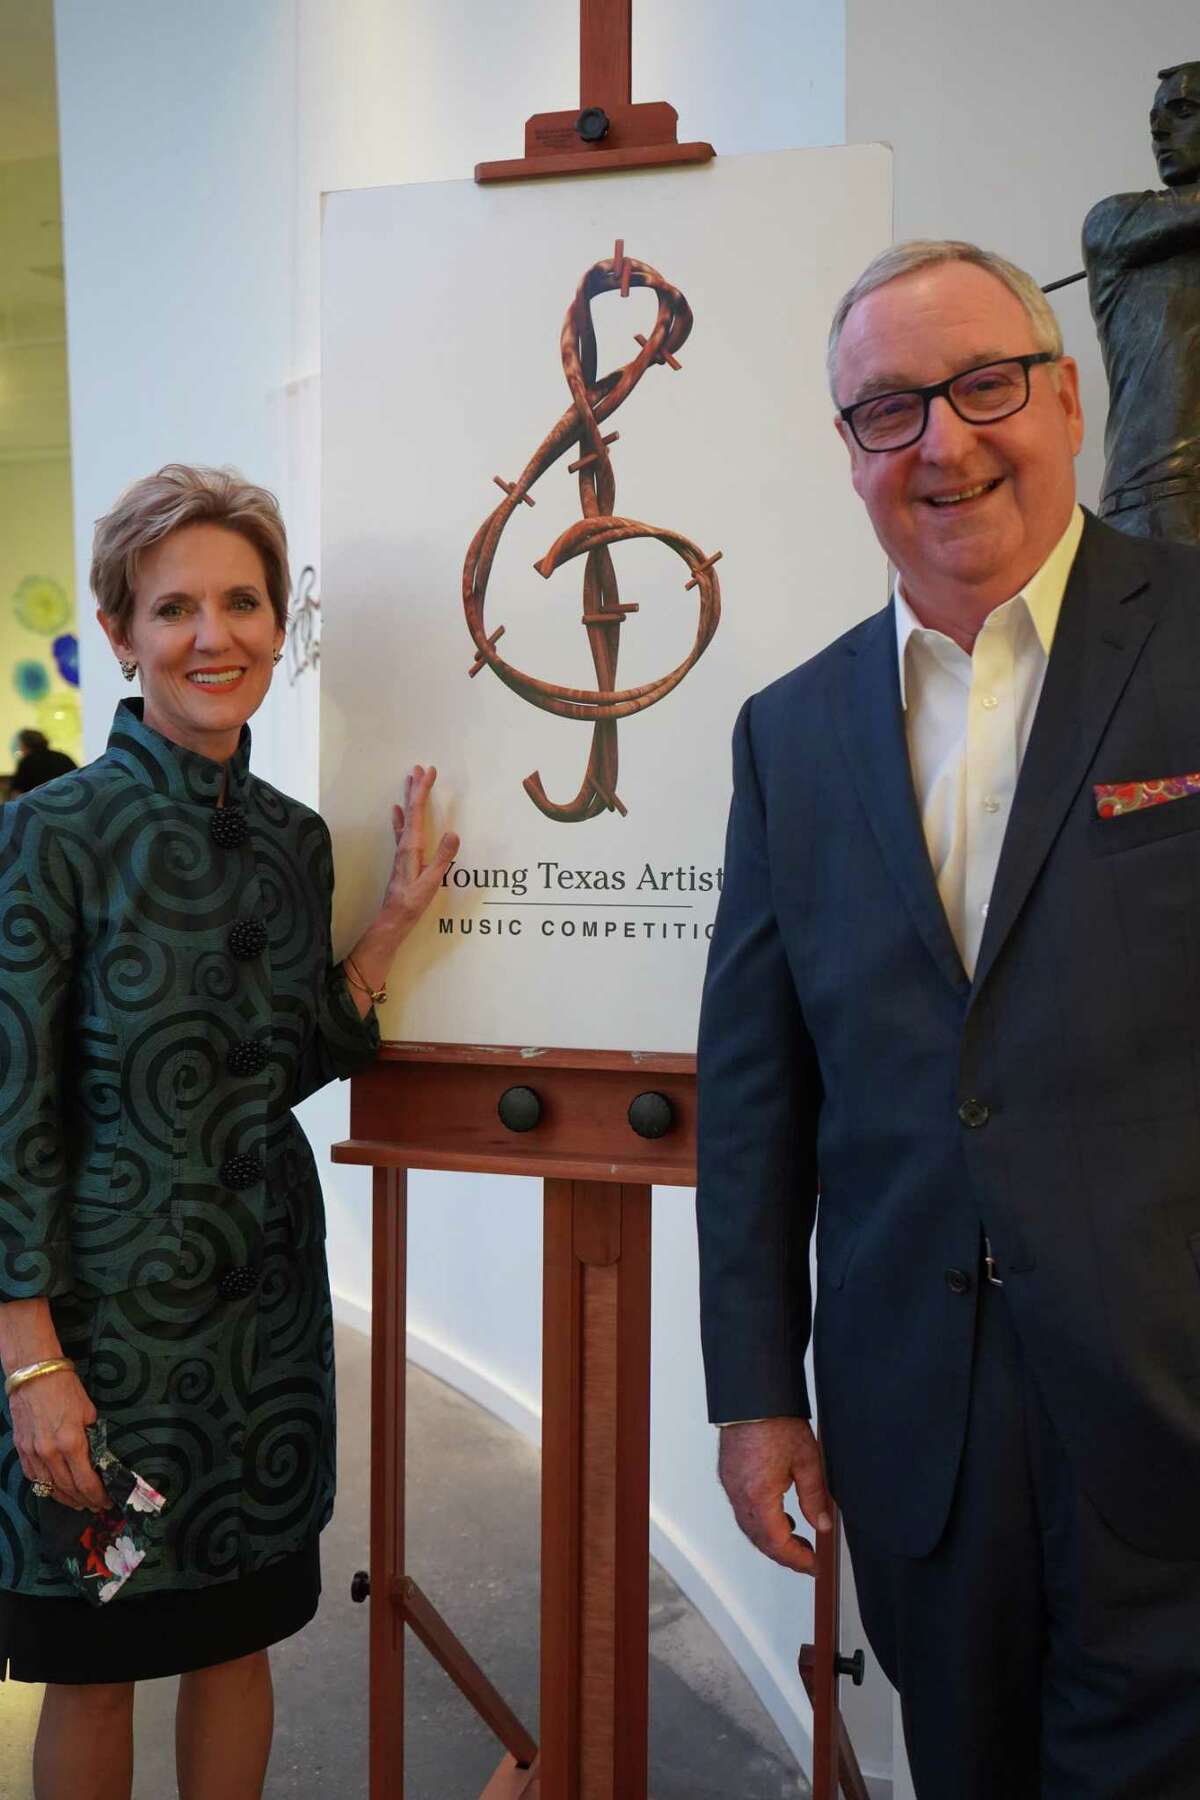 Pictured are Susie Moore Pokorski and Gil Staley with the Young Texas Artists Music Competition logo.